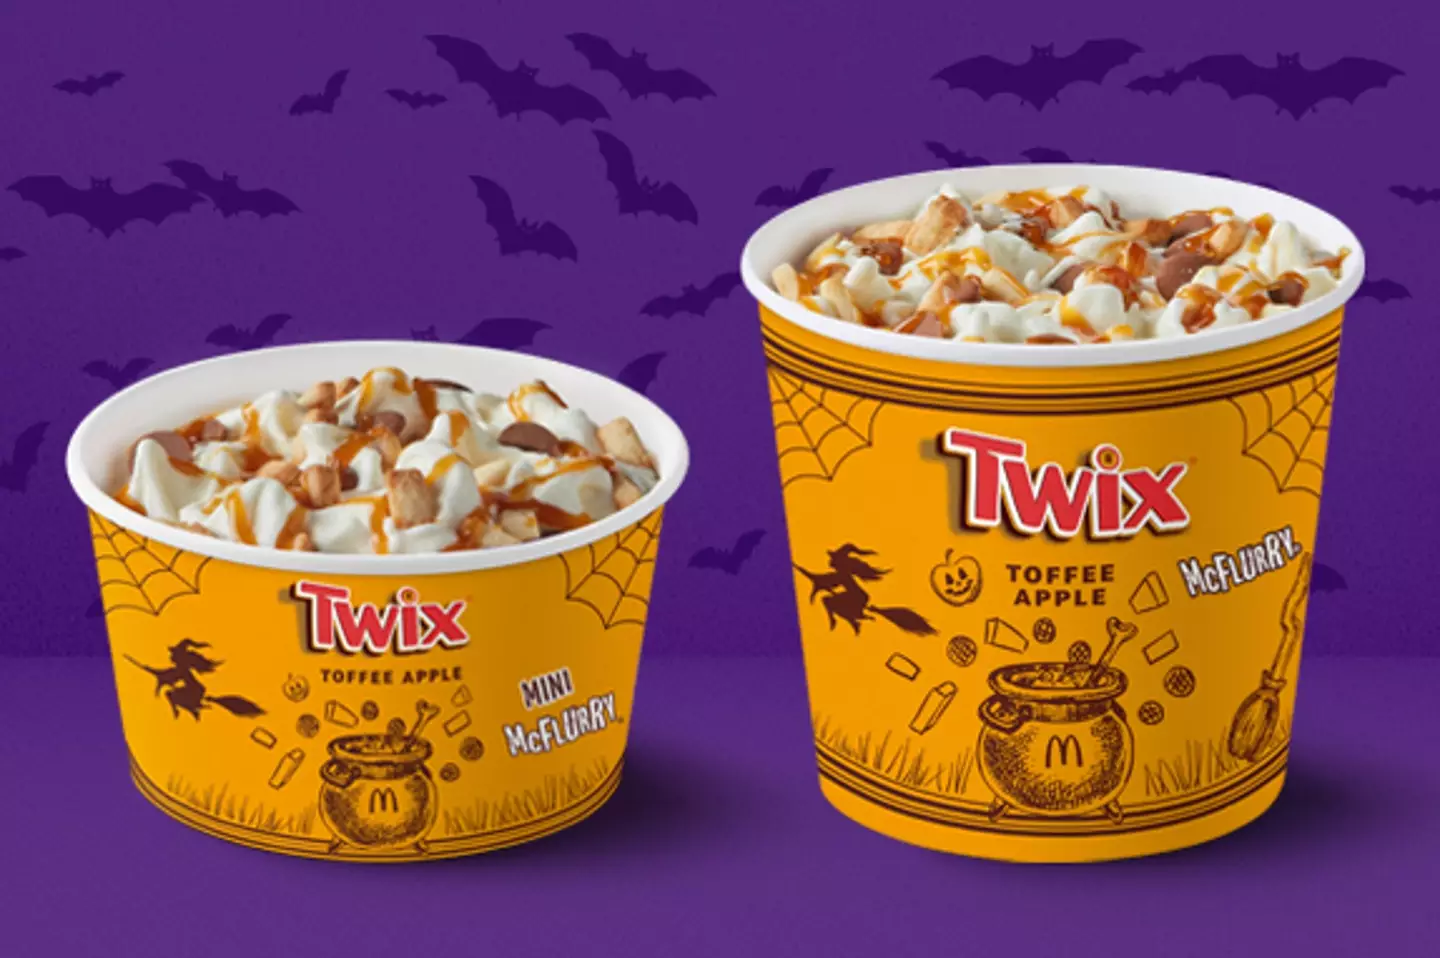 McDonald's has launched the M&M's Halloween and Twix Toffee Apple McFlurry flavours.